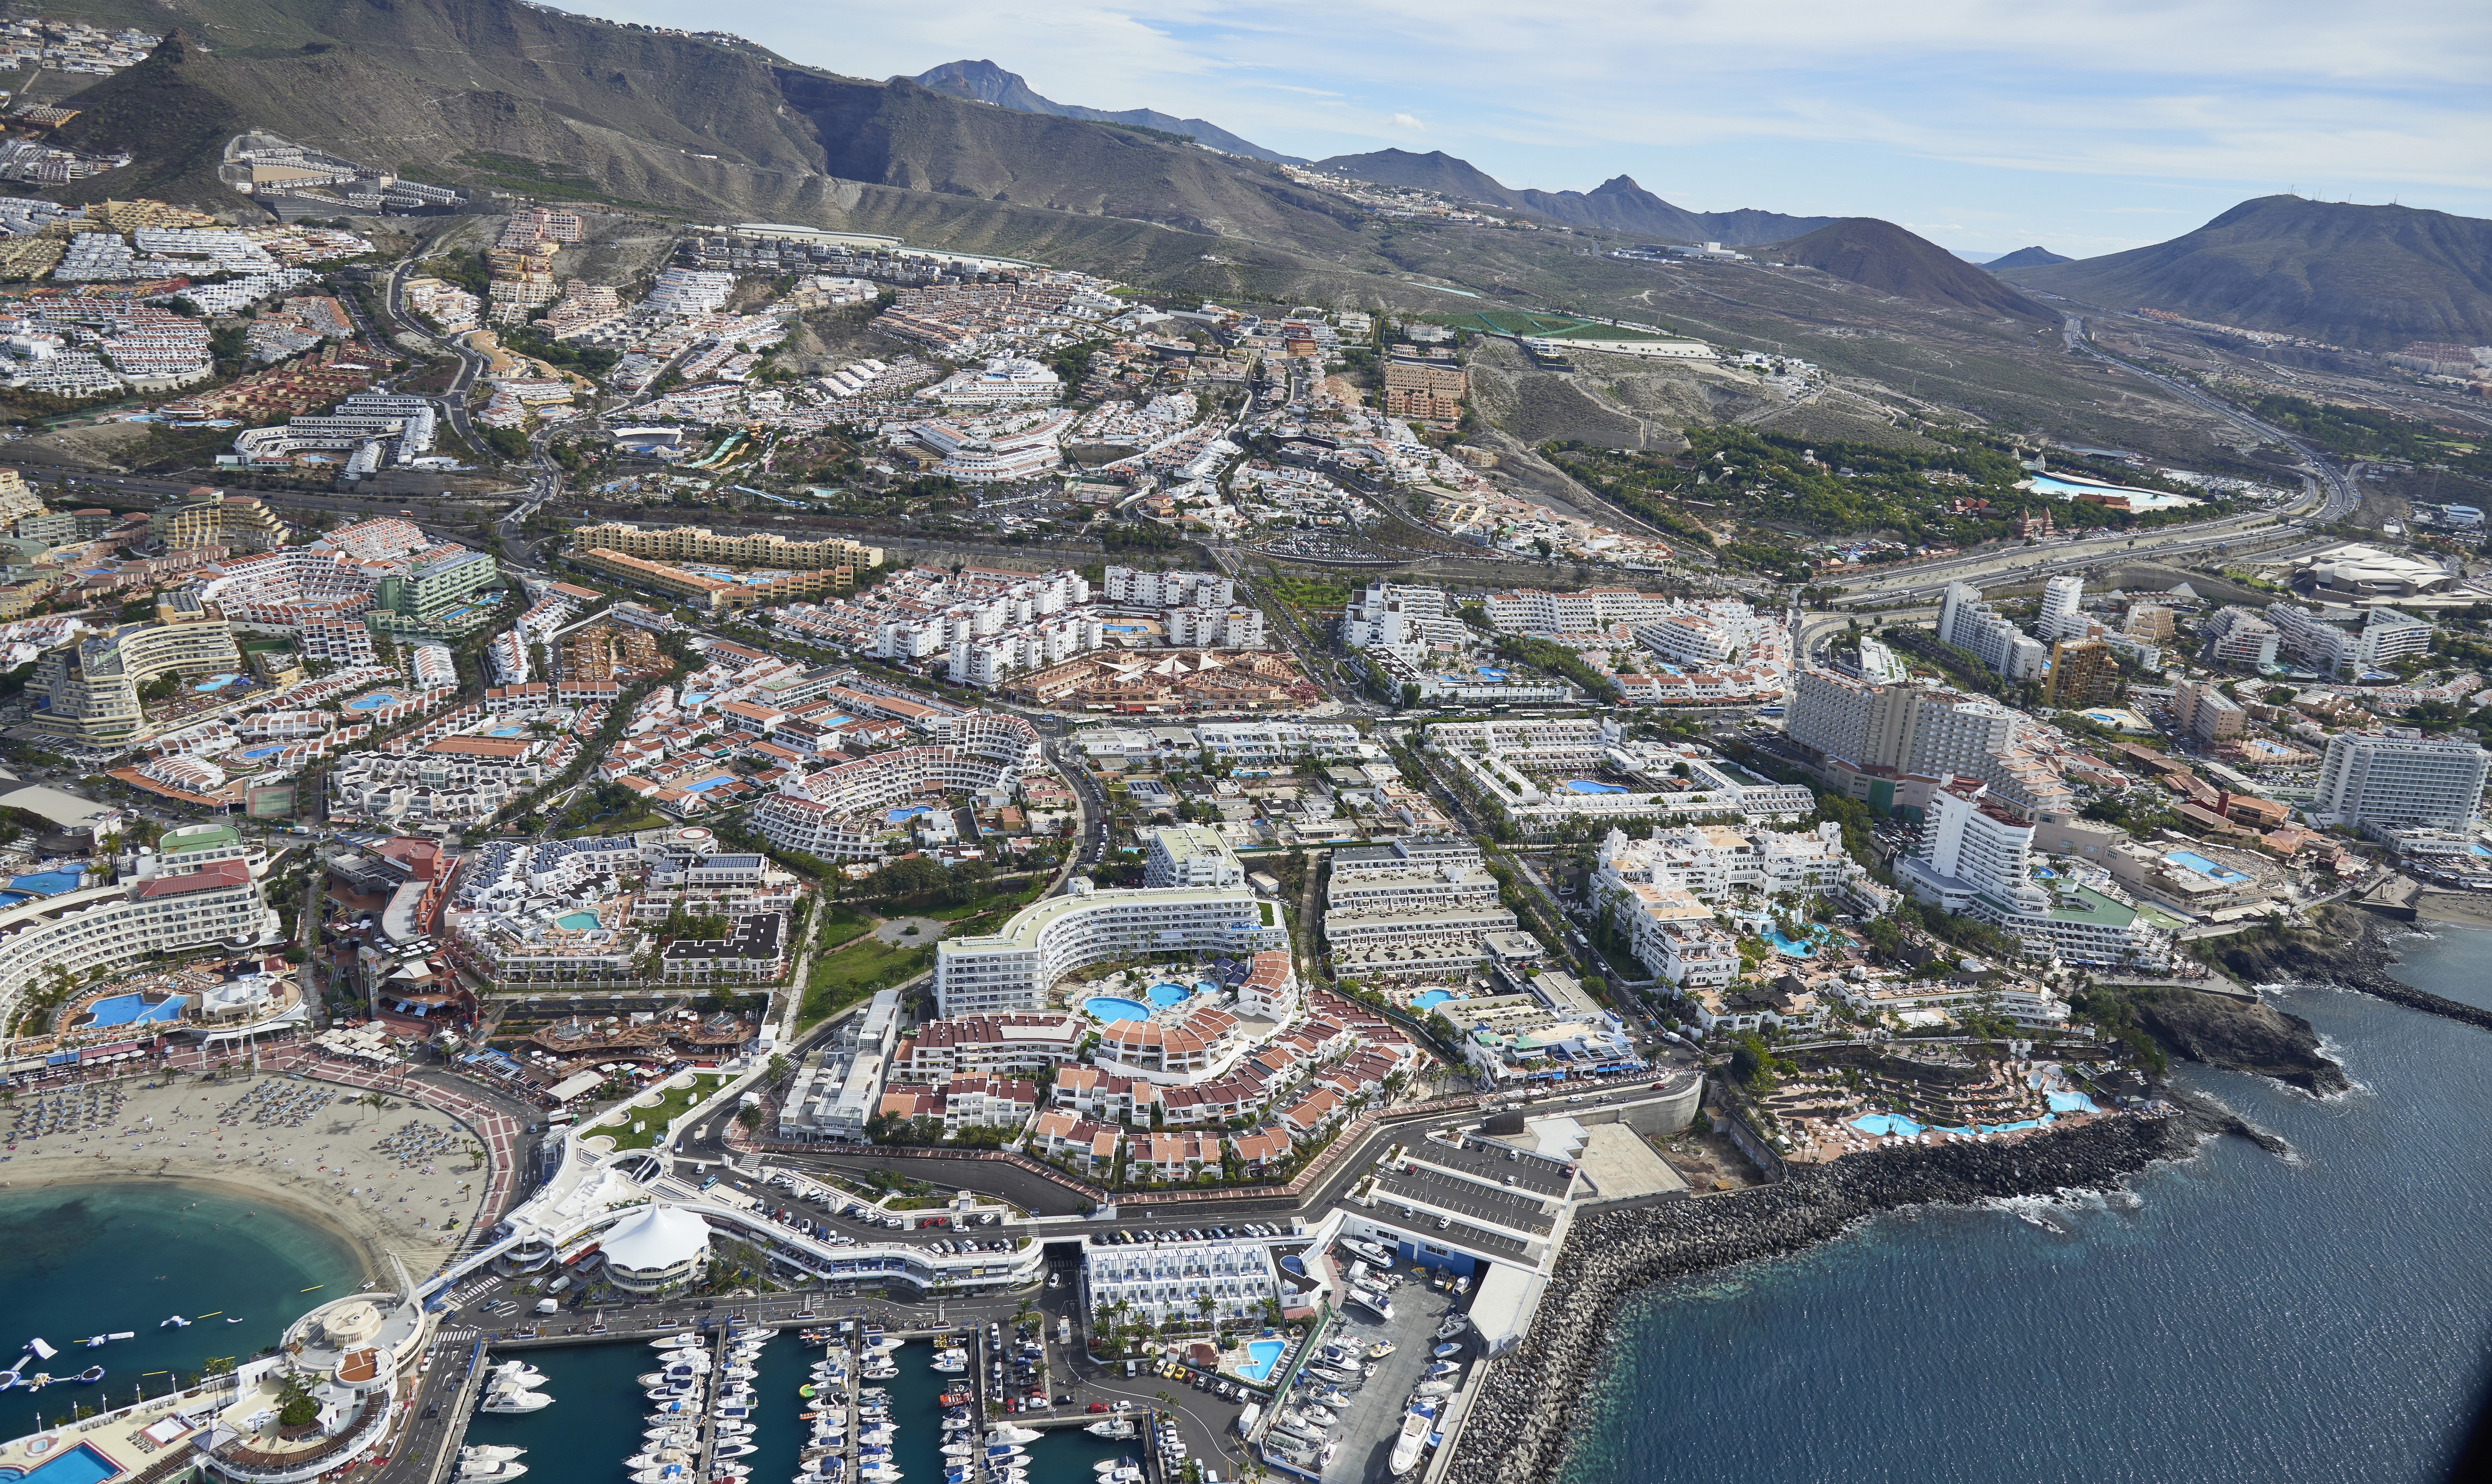 A0434 Tenerife, Adeje aerial view